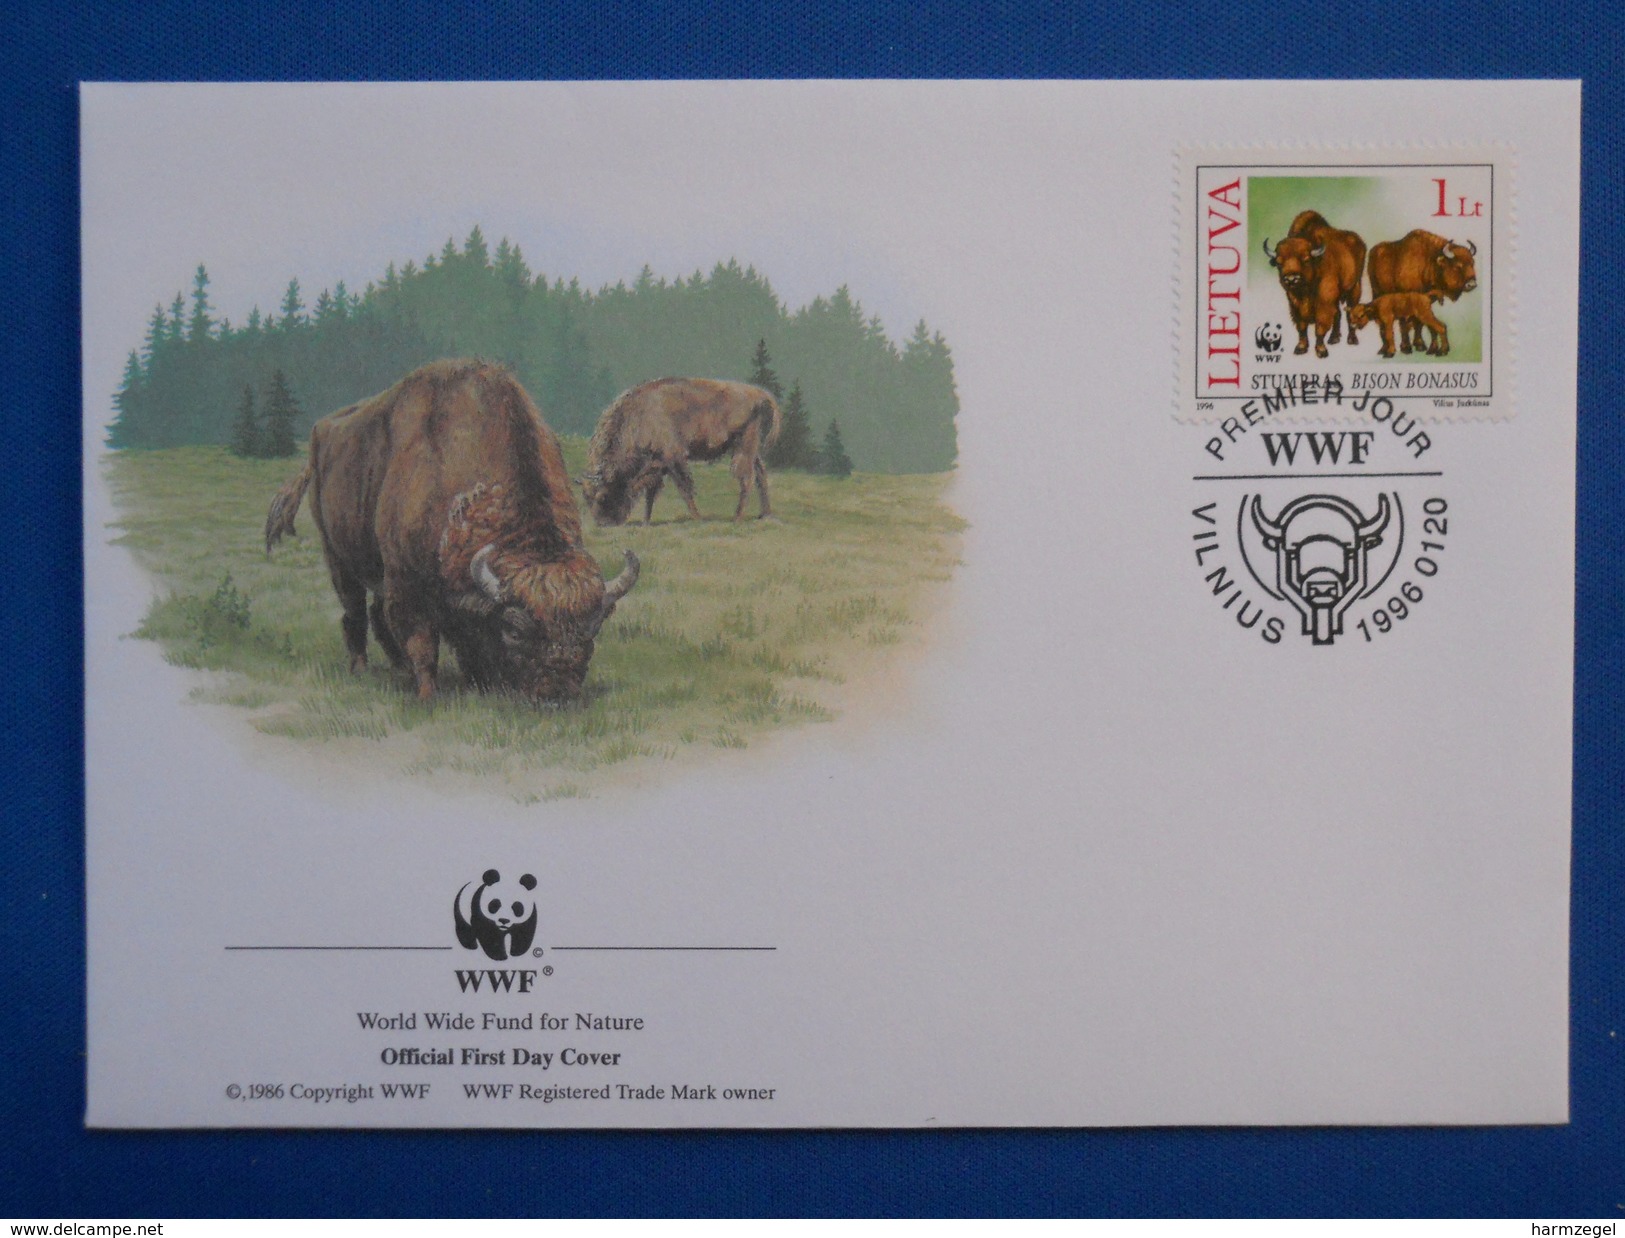 Bull, Bison, WWF - Cows